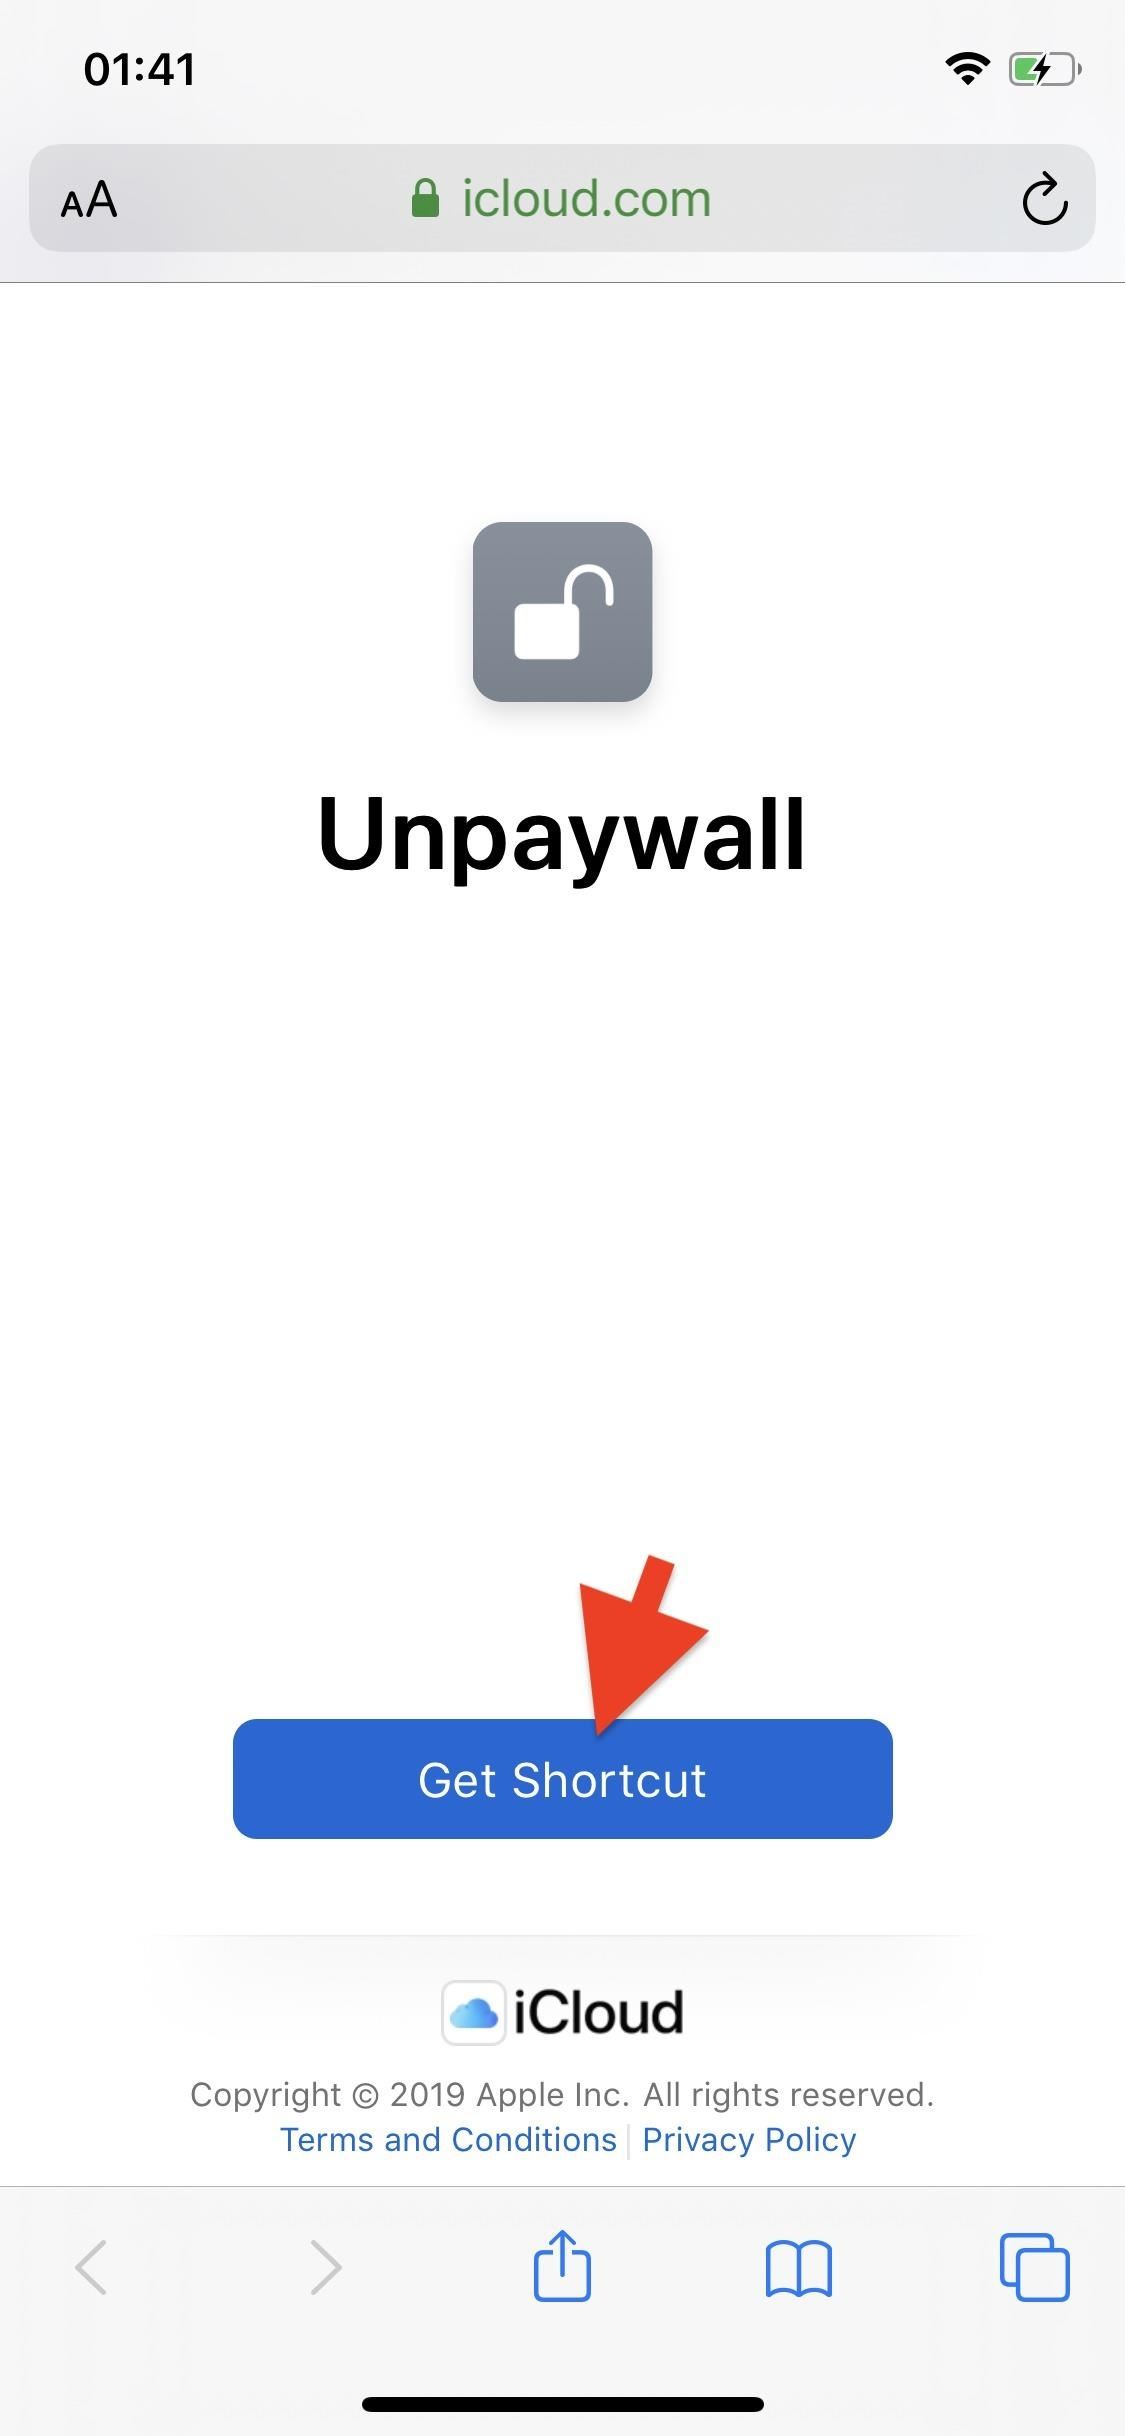 How to get around onlyfans paywall